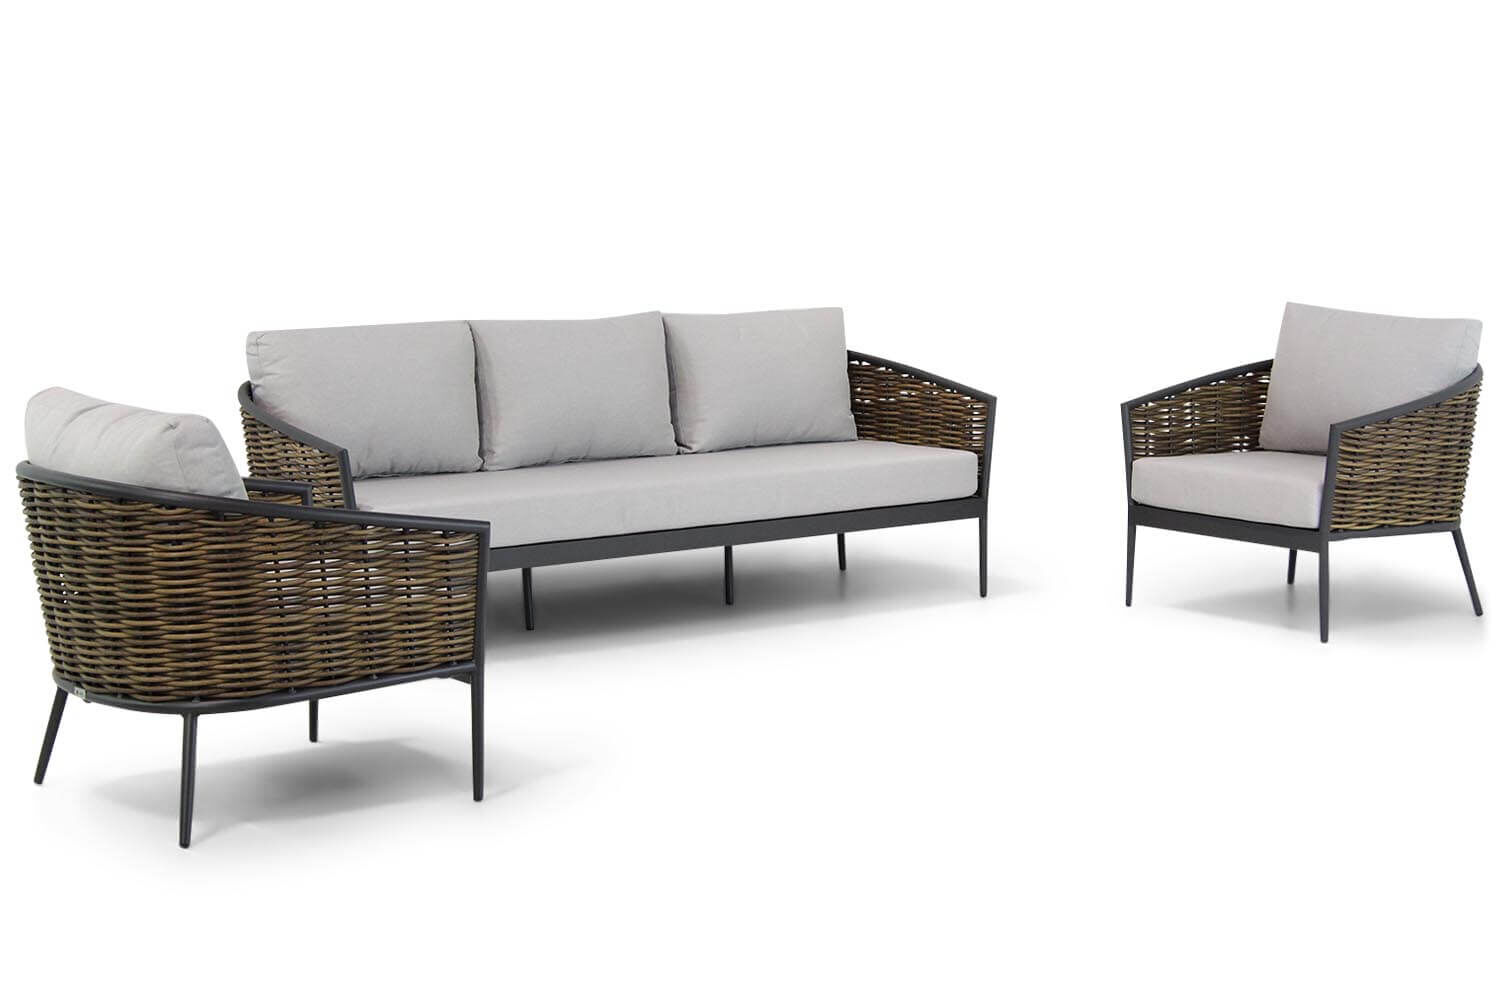 Coco Palm stoel-bank loungeset -